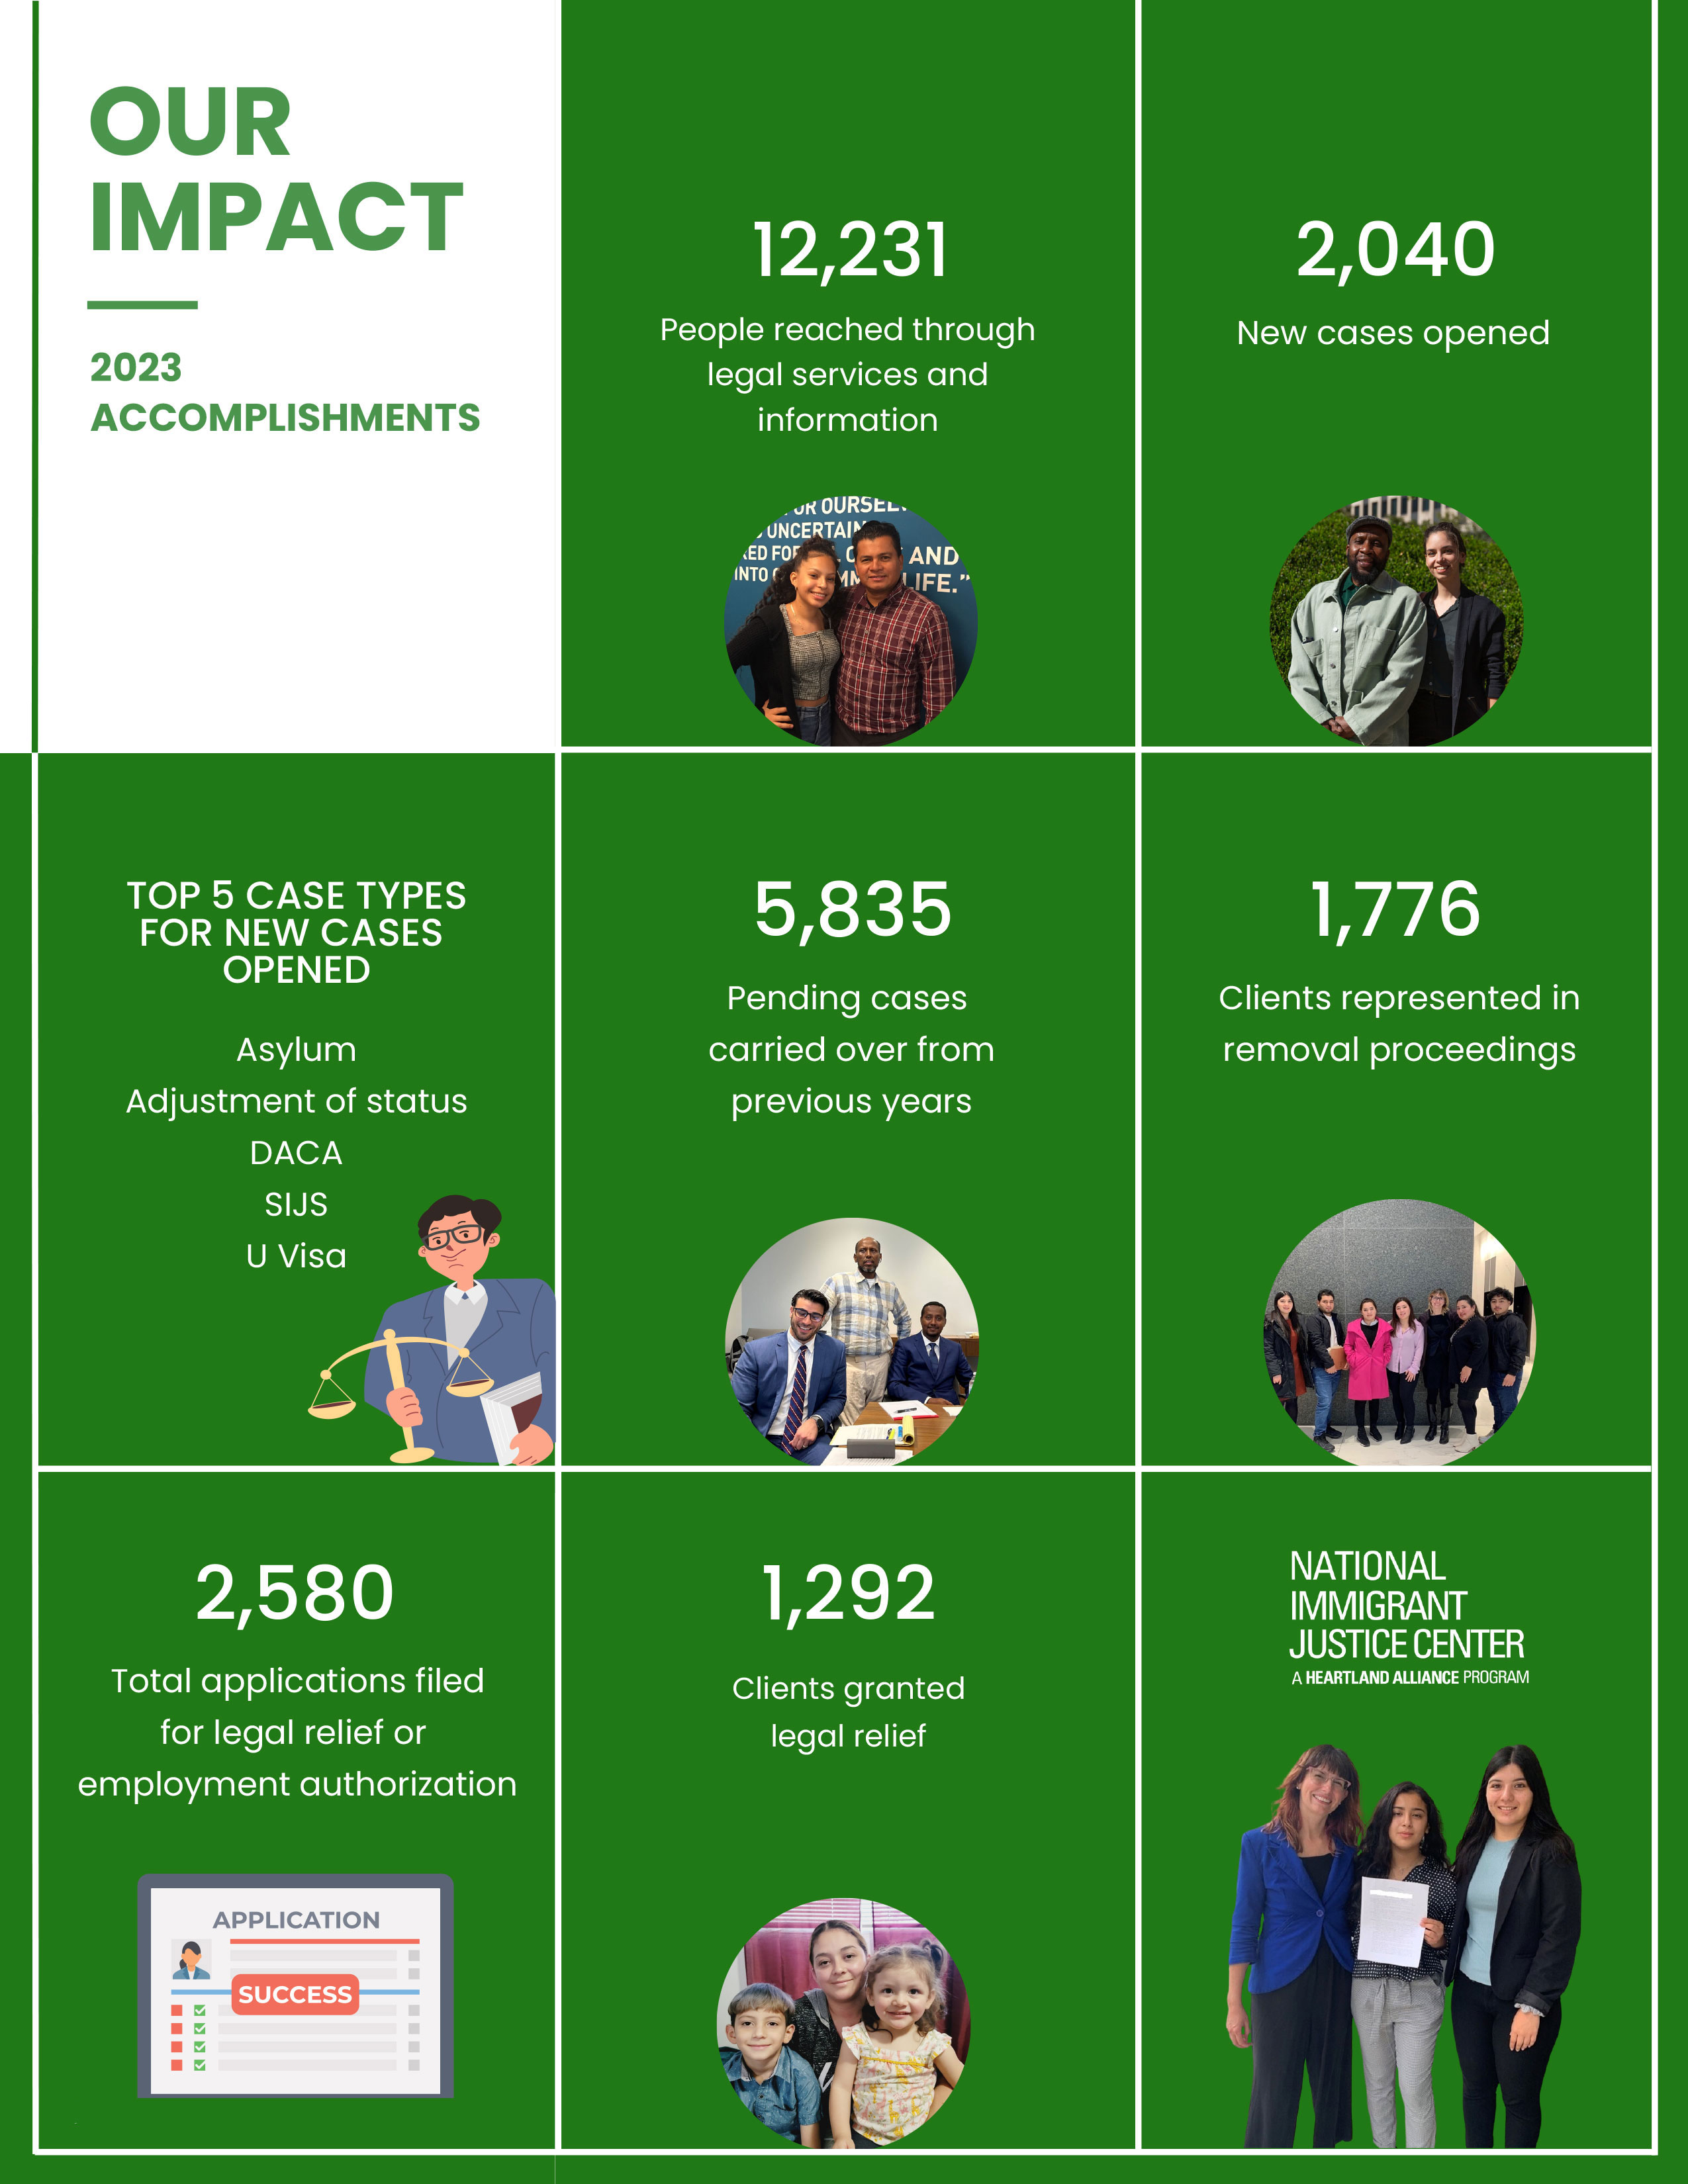 Green and white graphic titled "Our Impact: 2023 Accomplishments" showing the following NIJC data for fiscal year 2023: 12,231 People reached through legal services and information; 2,040 New cases opened; TOP 5 CASE TYPES FOR NEW CASES OPENED were Asylum, Adjustment of status, DACA, SIJS, U Visa; 5,835 Pending cases carried over from previous years; 1,776 Clients represented in removal proceedings; 2,580 Total applications filed for legal relief or employment authorization; 1,292 Clients granted relief